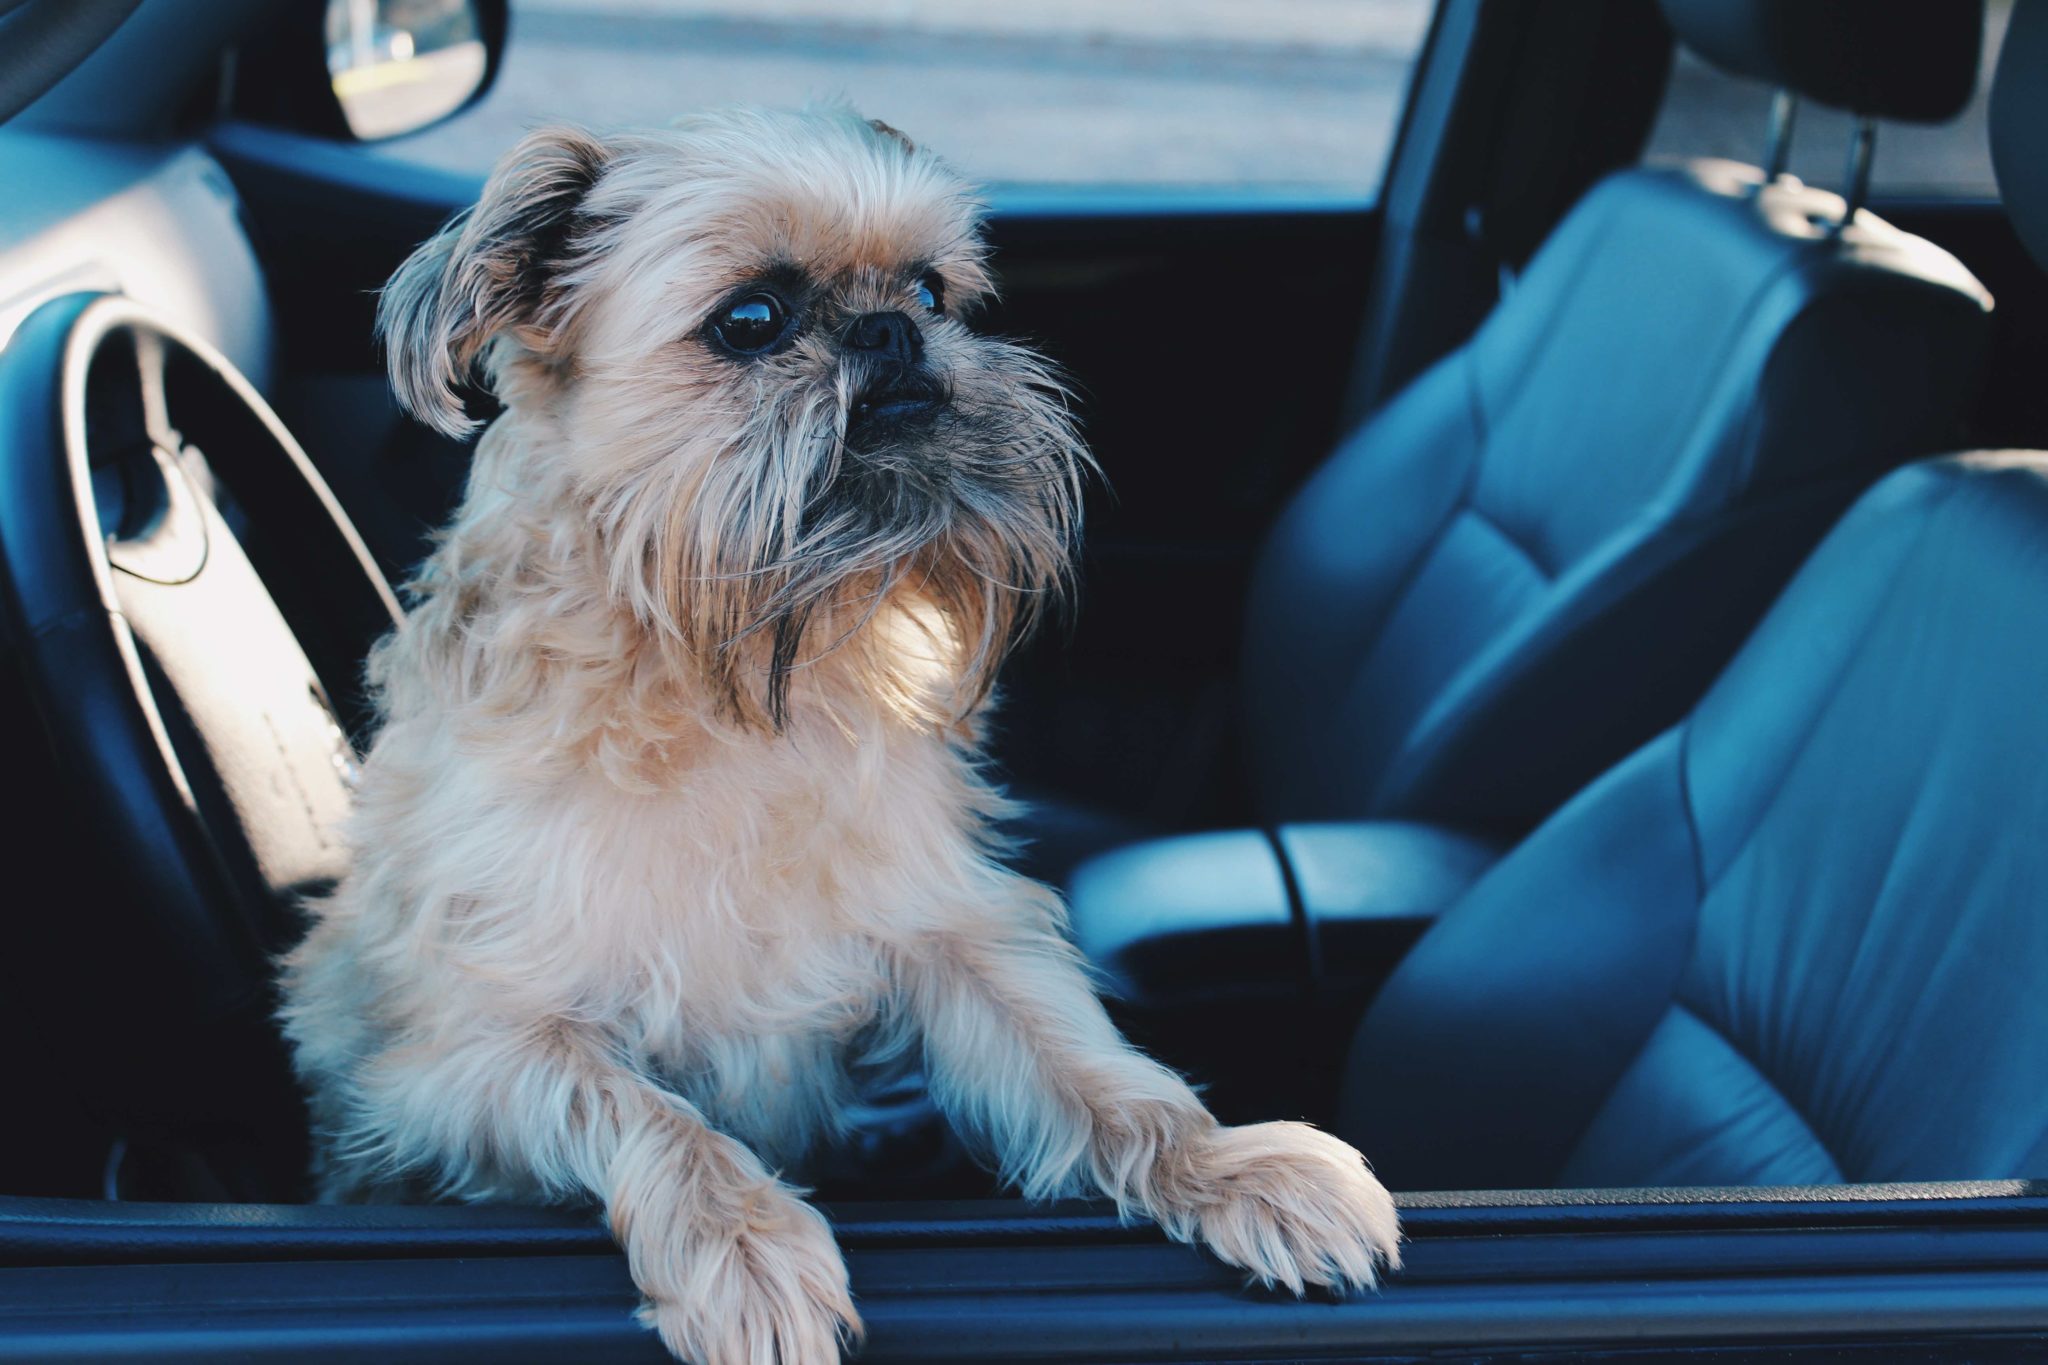 DTKAustin is sharing an important story about her Brussels Griffon, Steven, and what it's like living with a dog that has Intervertebral disc disease.